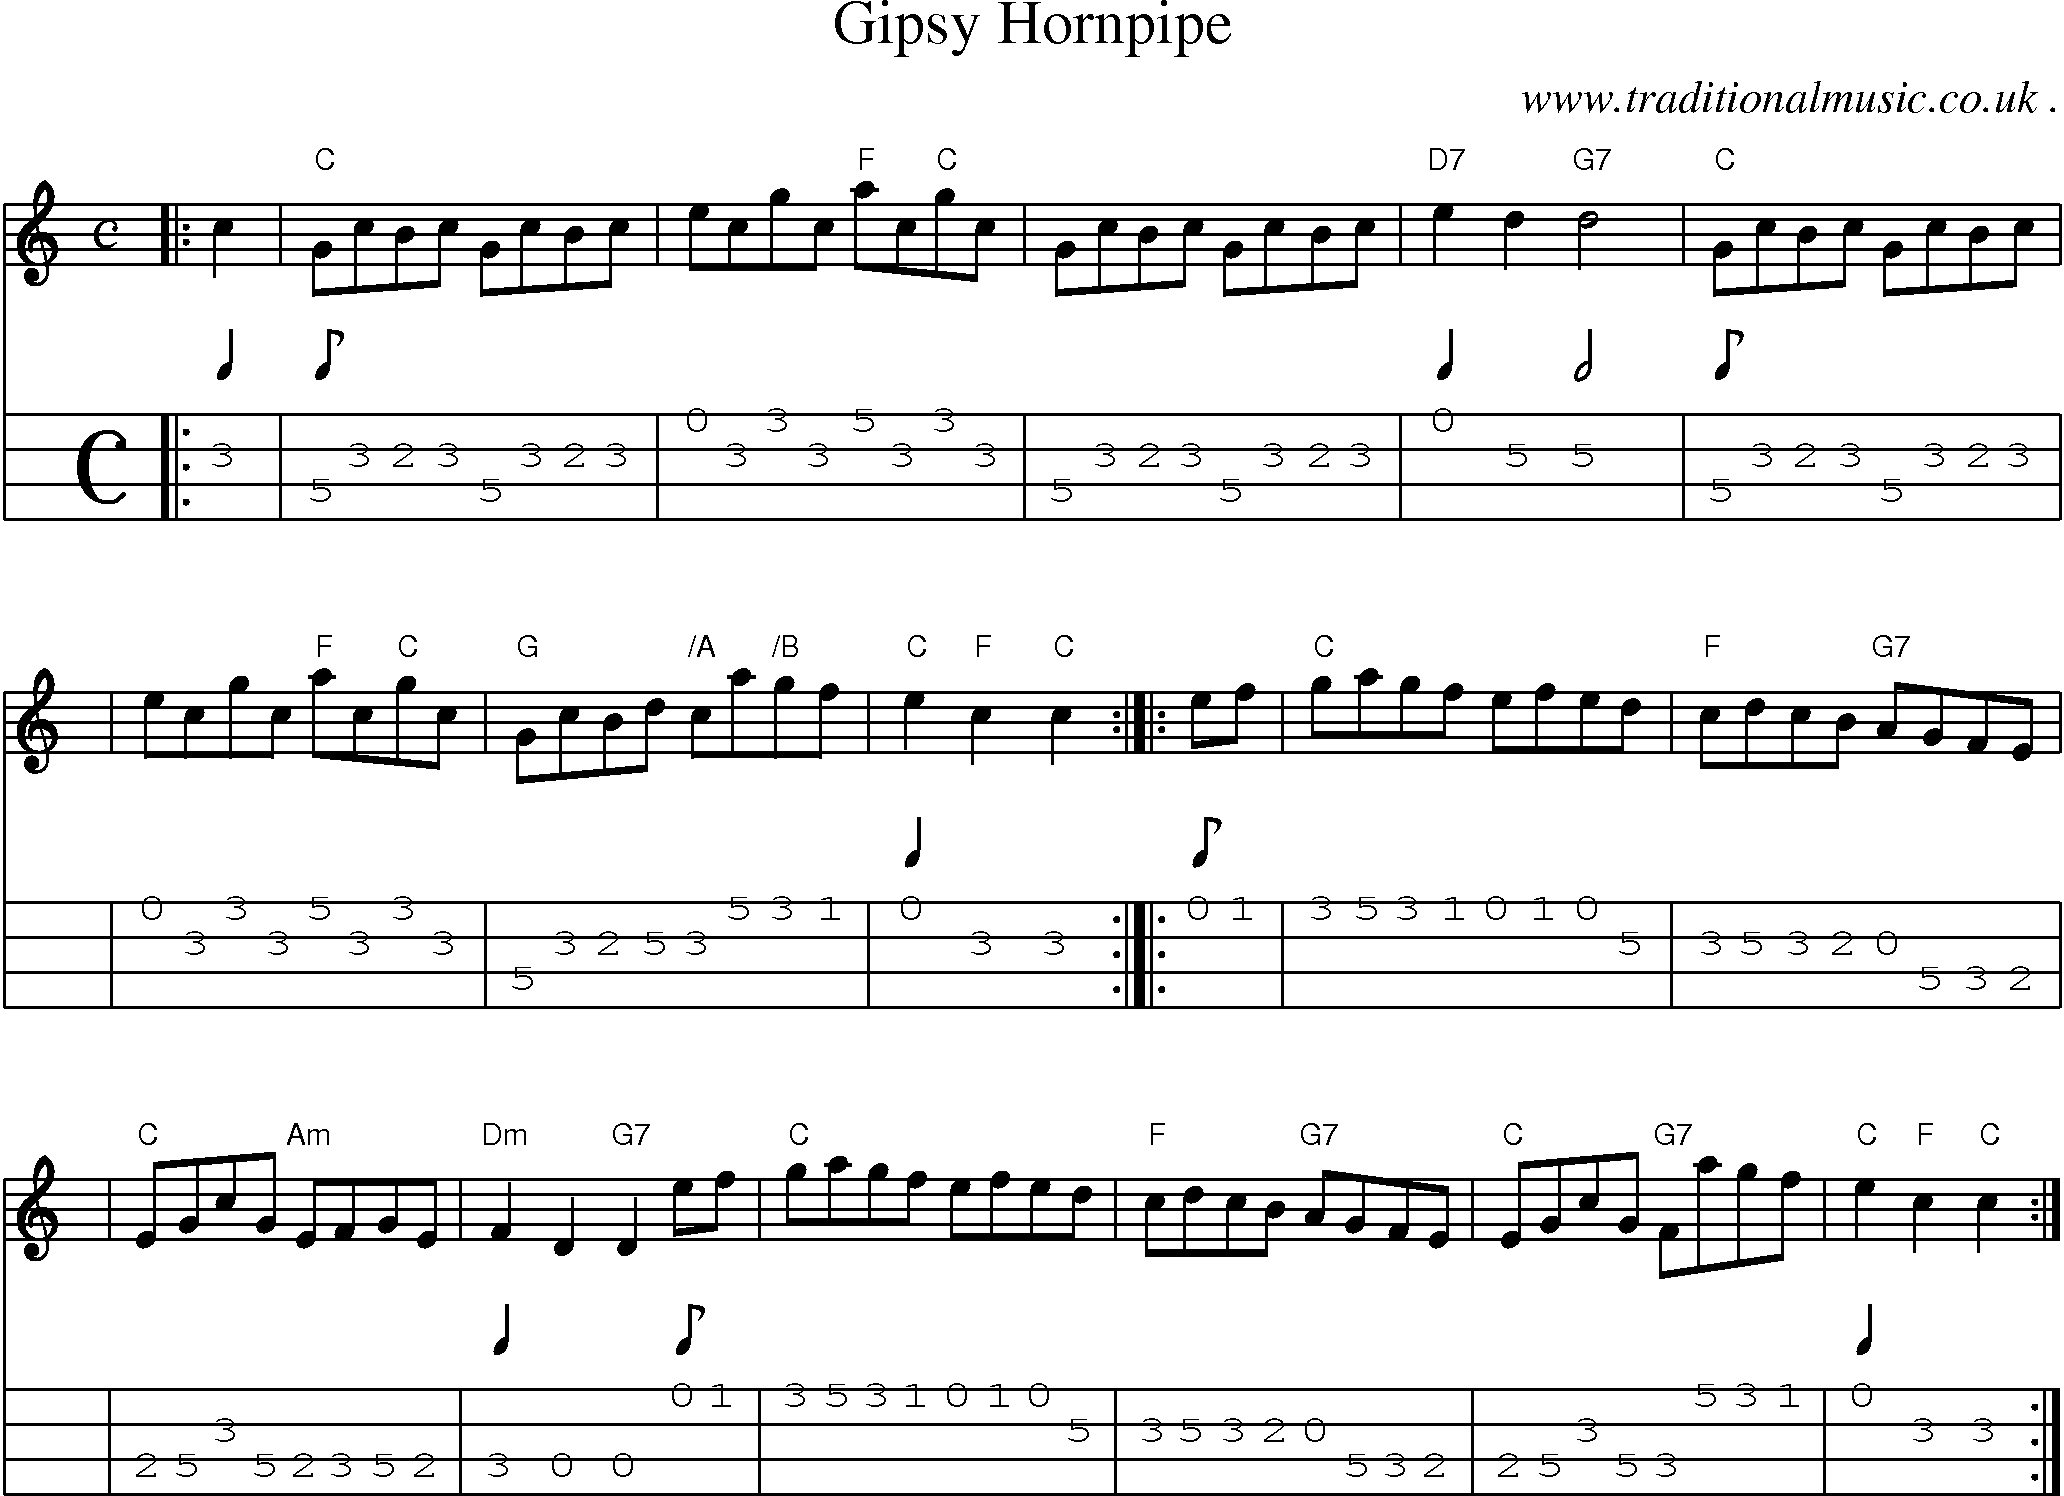 Sheet-music  score, Chords and Mandolin Tabs for Gipsy Hornpipe